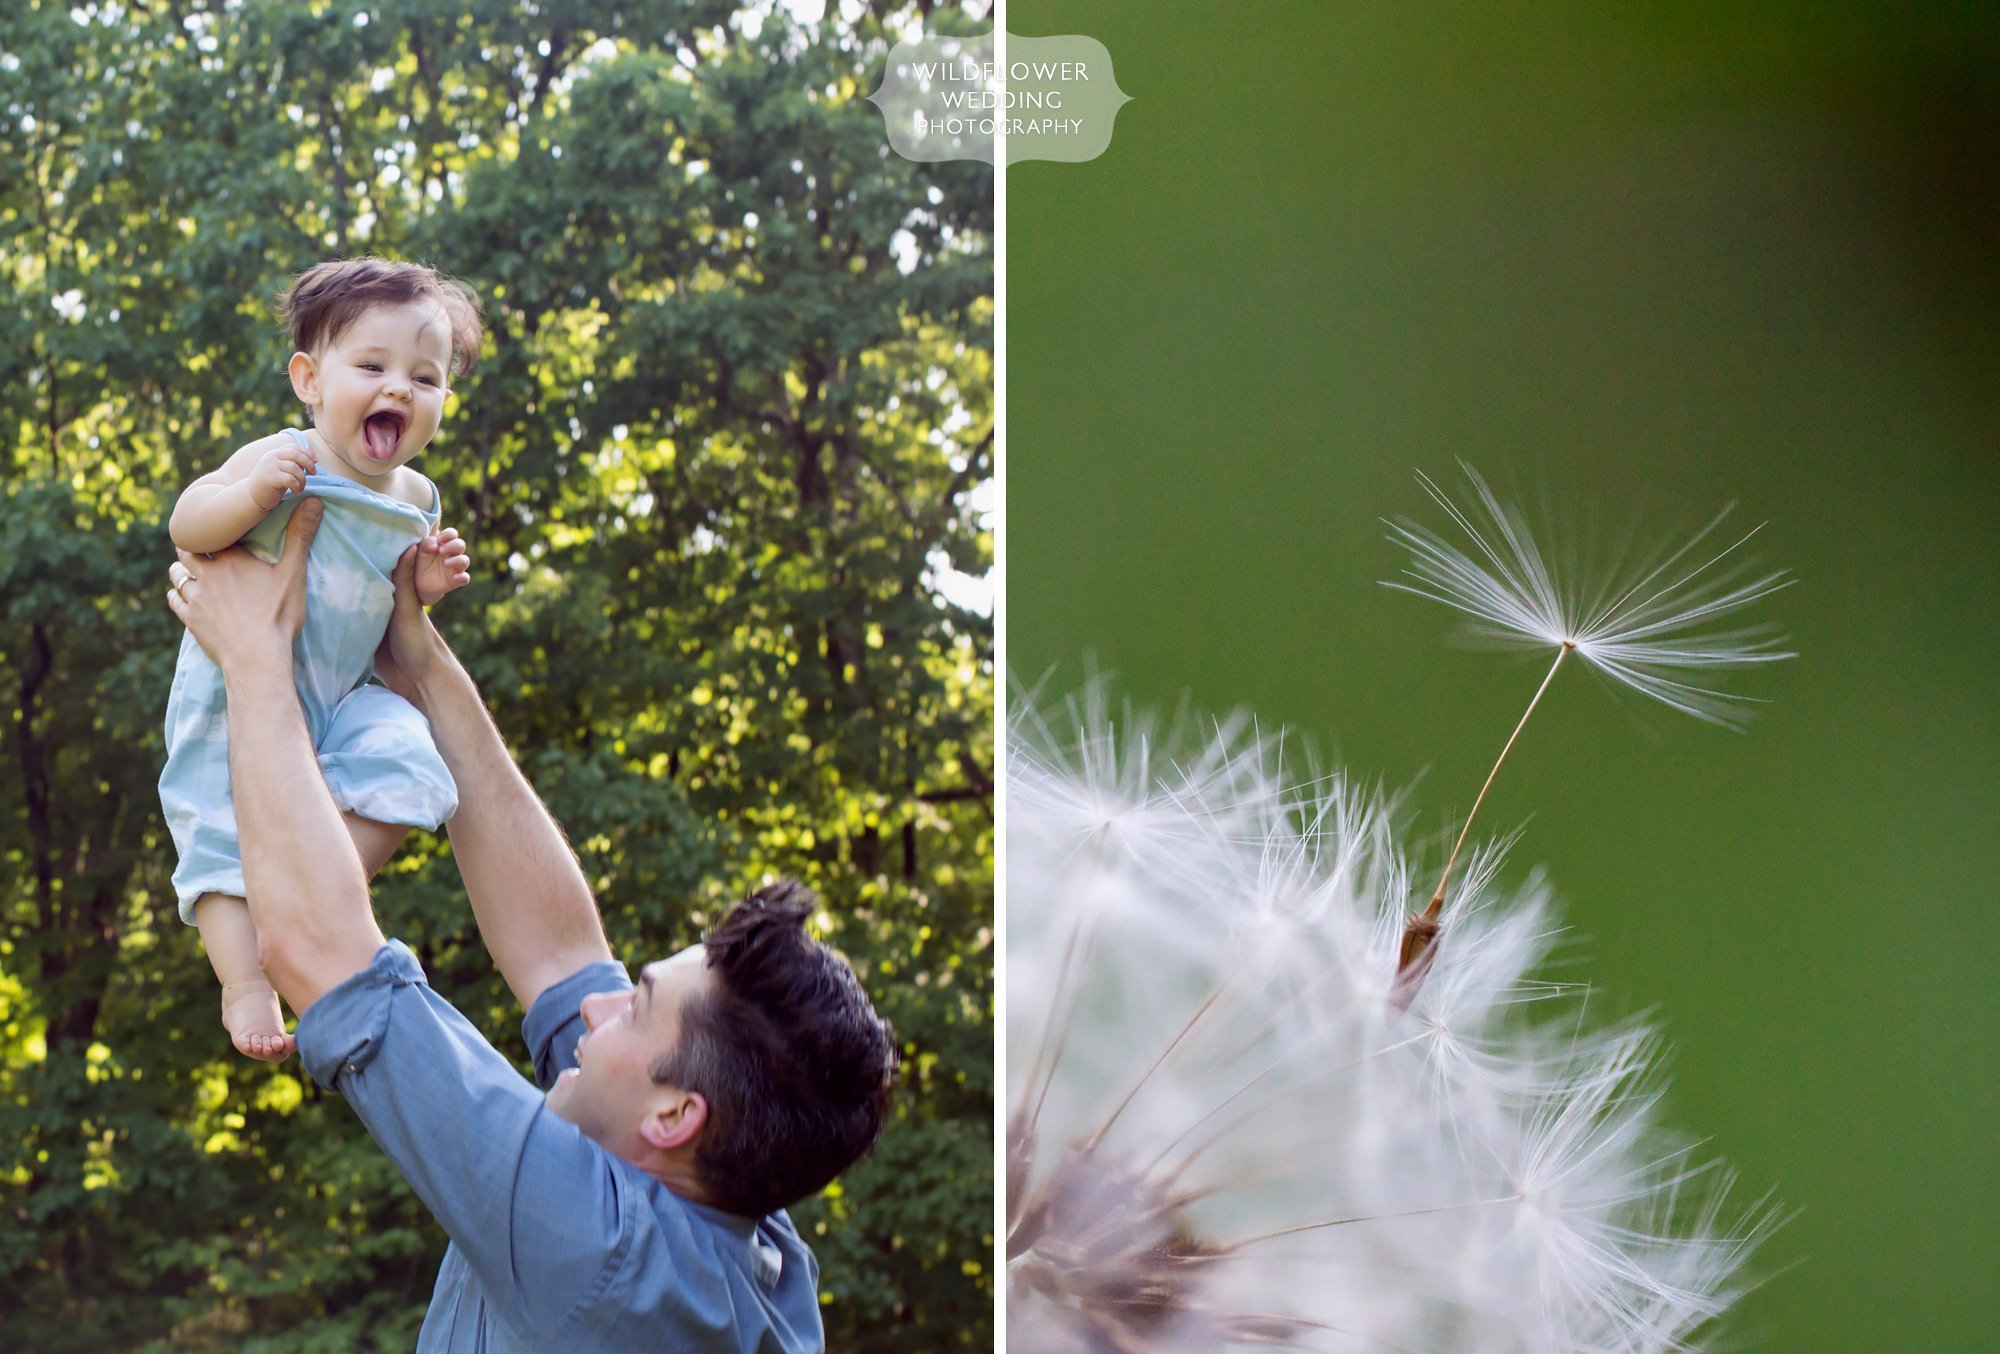 Fun photo of the dad holding his baby up in the air in the woods during this outdoor photography session in Columbia.